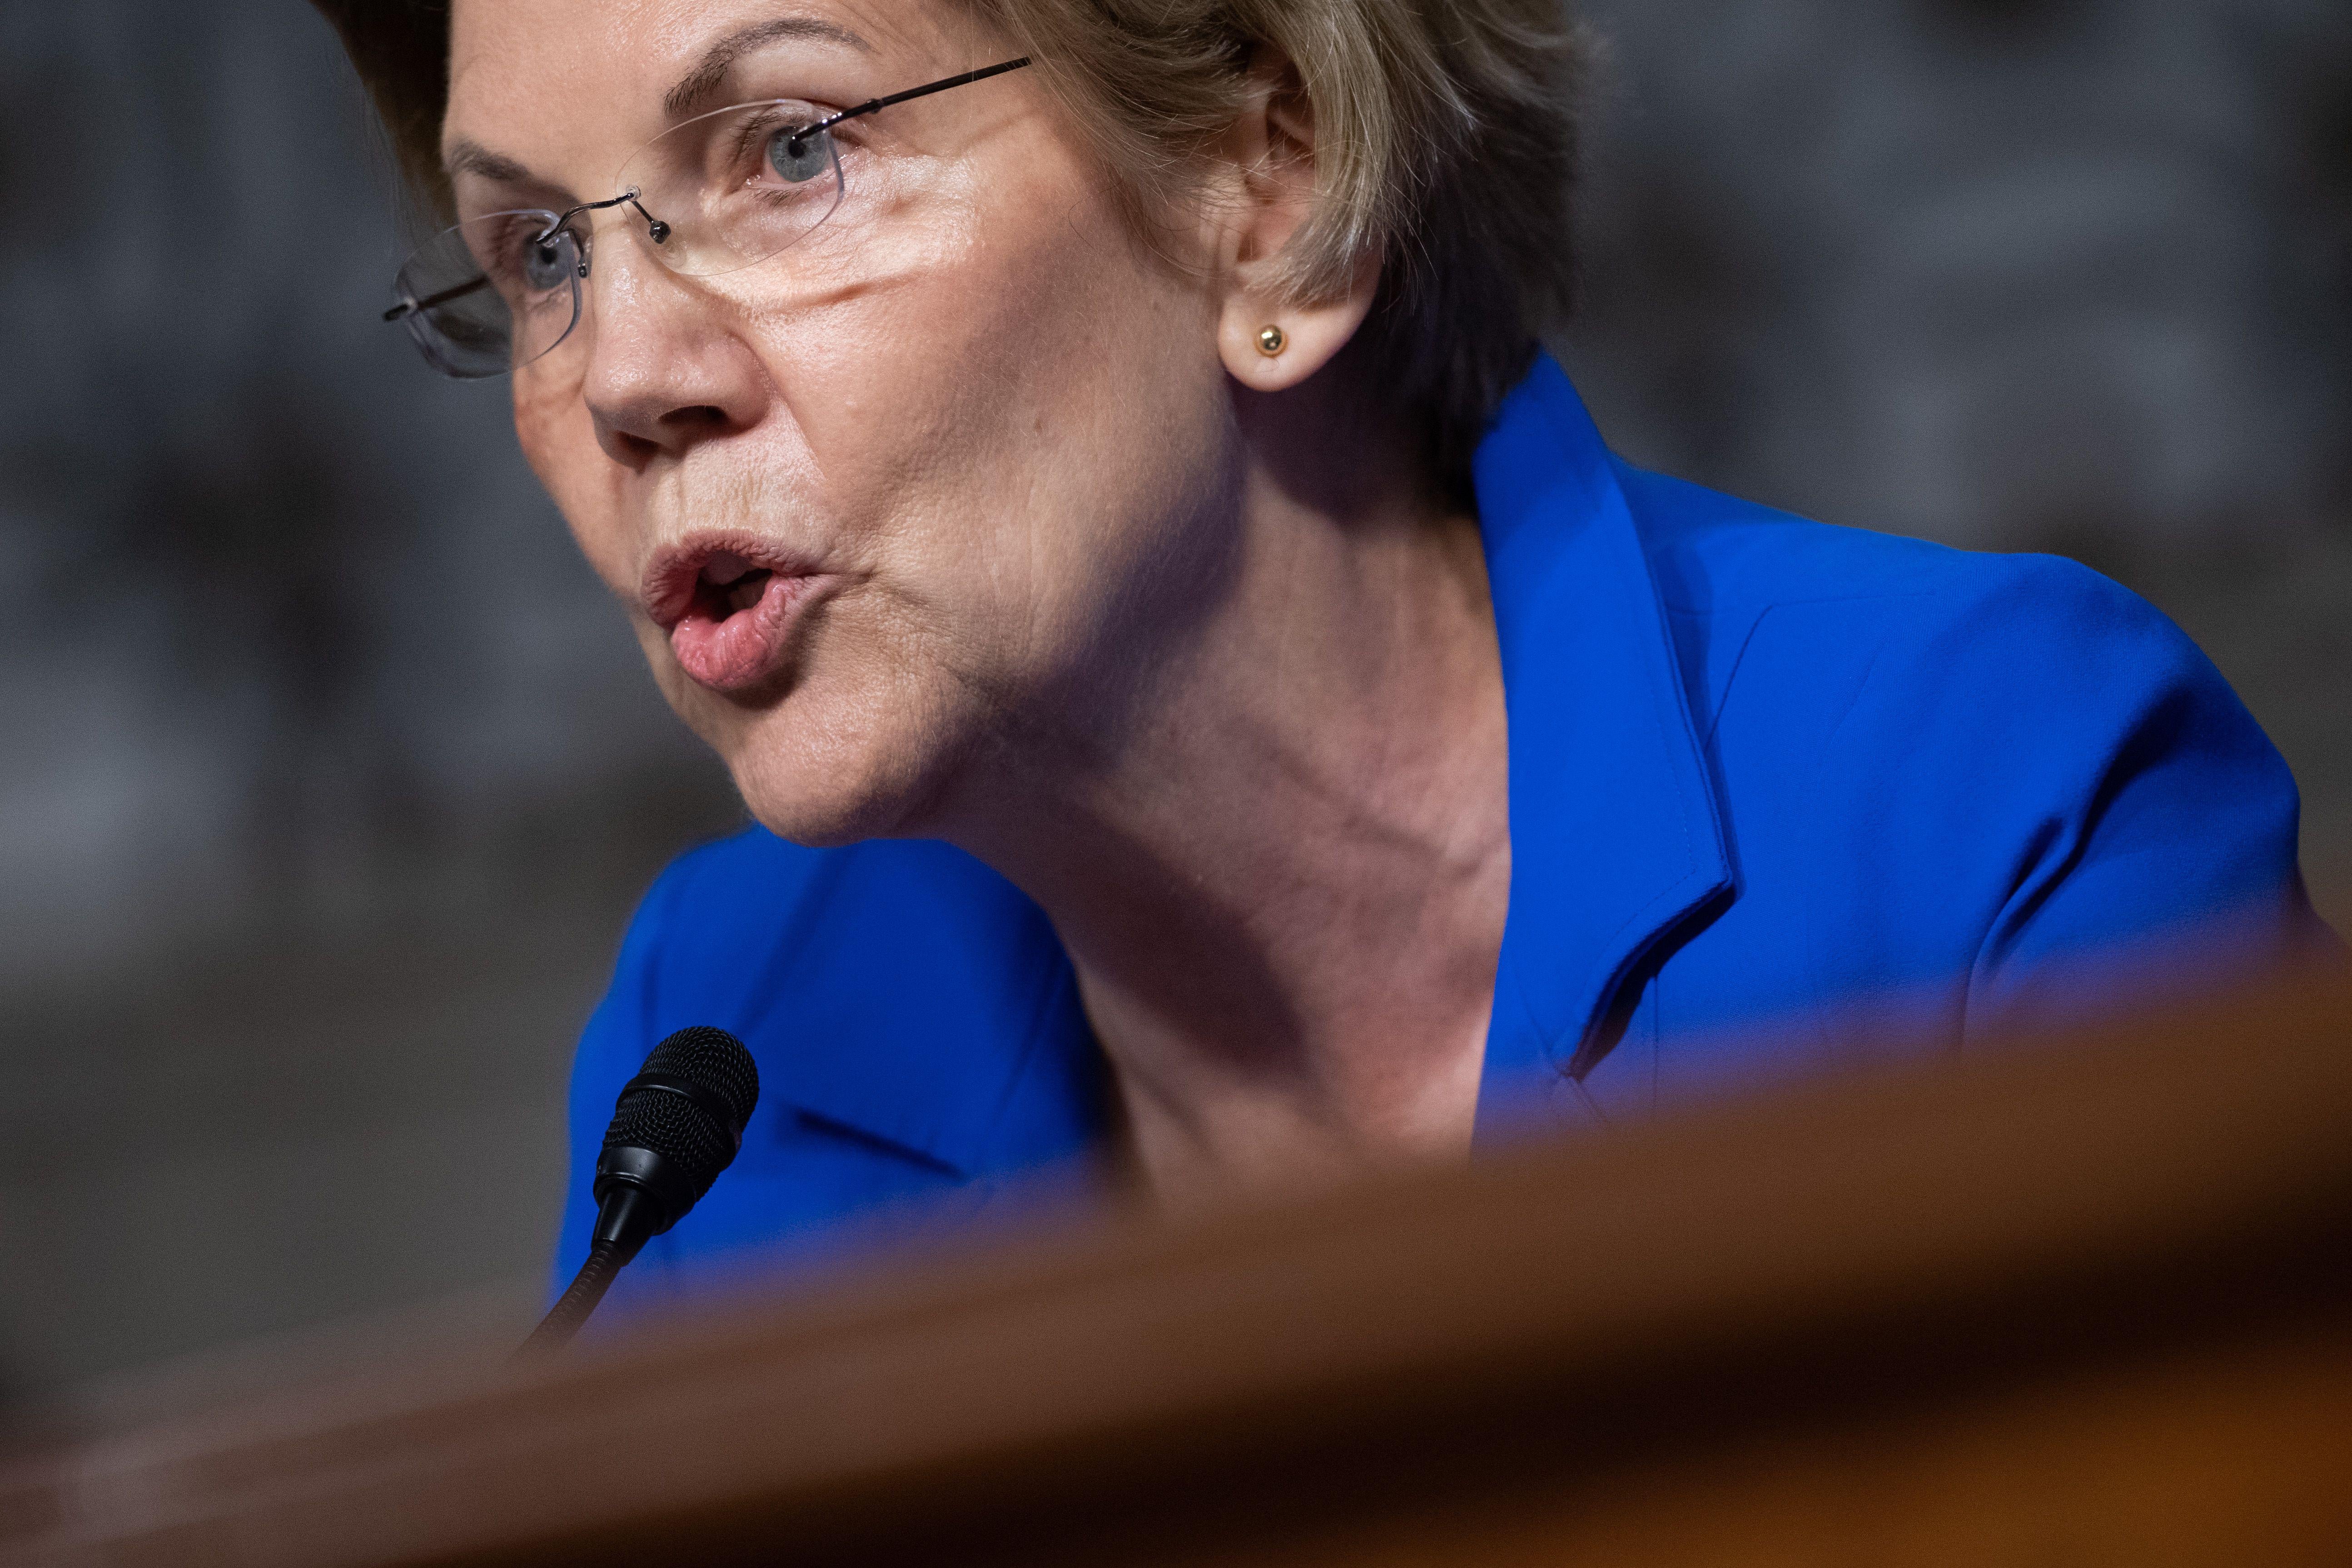 Warren speaks into a microphone at a Senate confirmation hearing